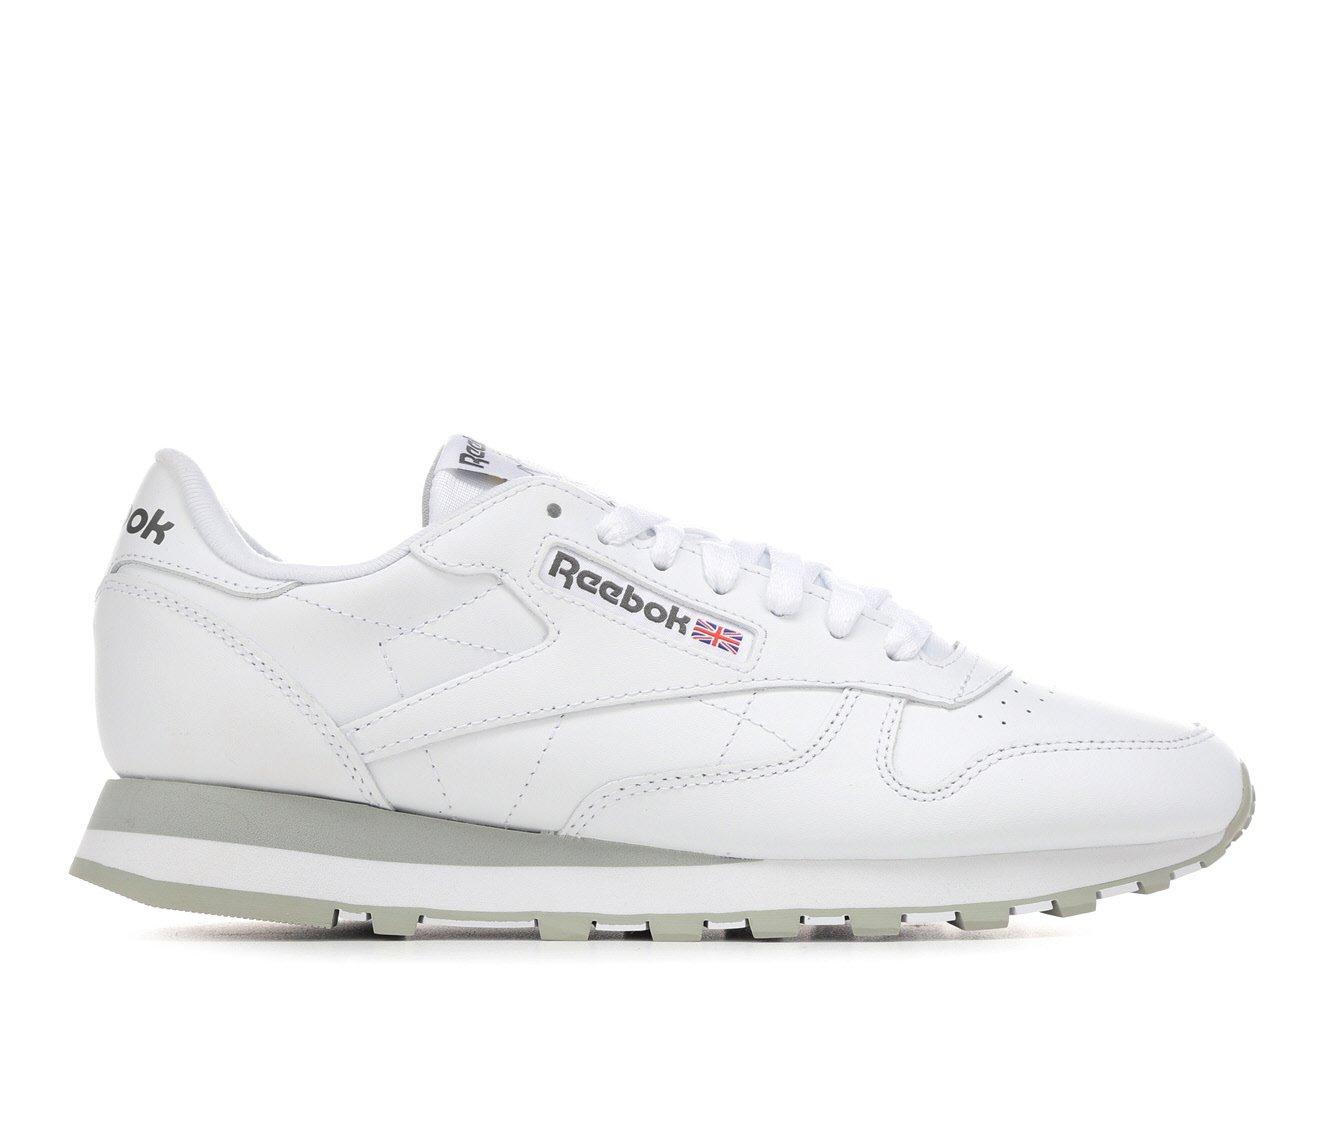 Imponerende tunnel lighed Men's Reebok Classic Leather Sneakers | Shoe Carnival